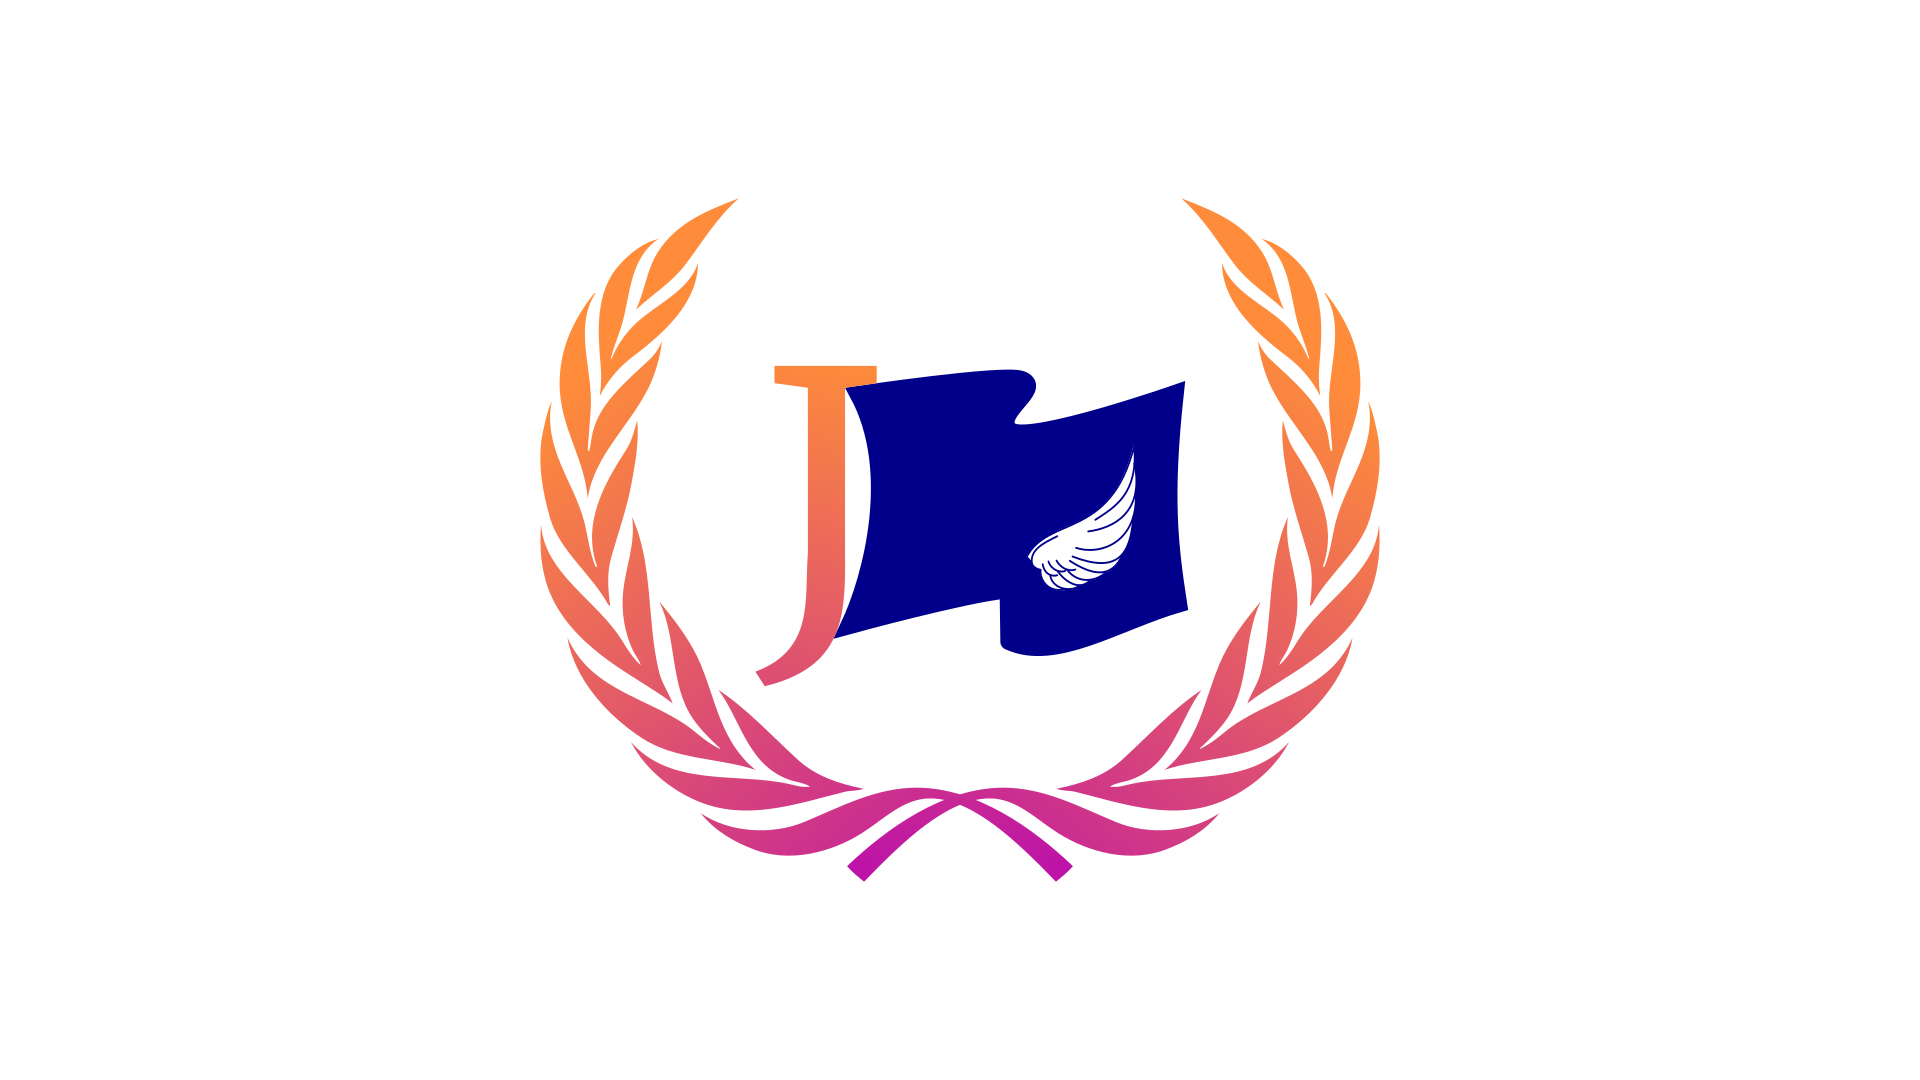 The licence’s logo with an orange-red olive branch wreath around a waving blue flag with a white dove wing, with the orange letter J serving as the mast.